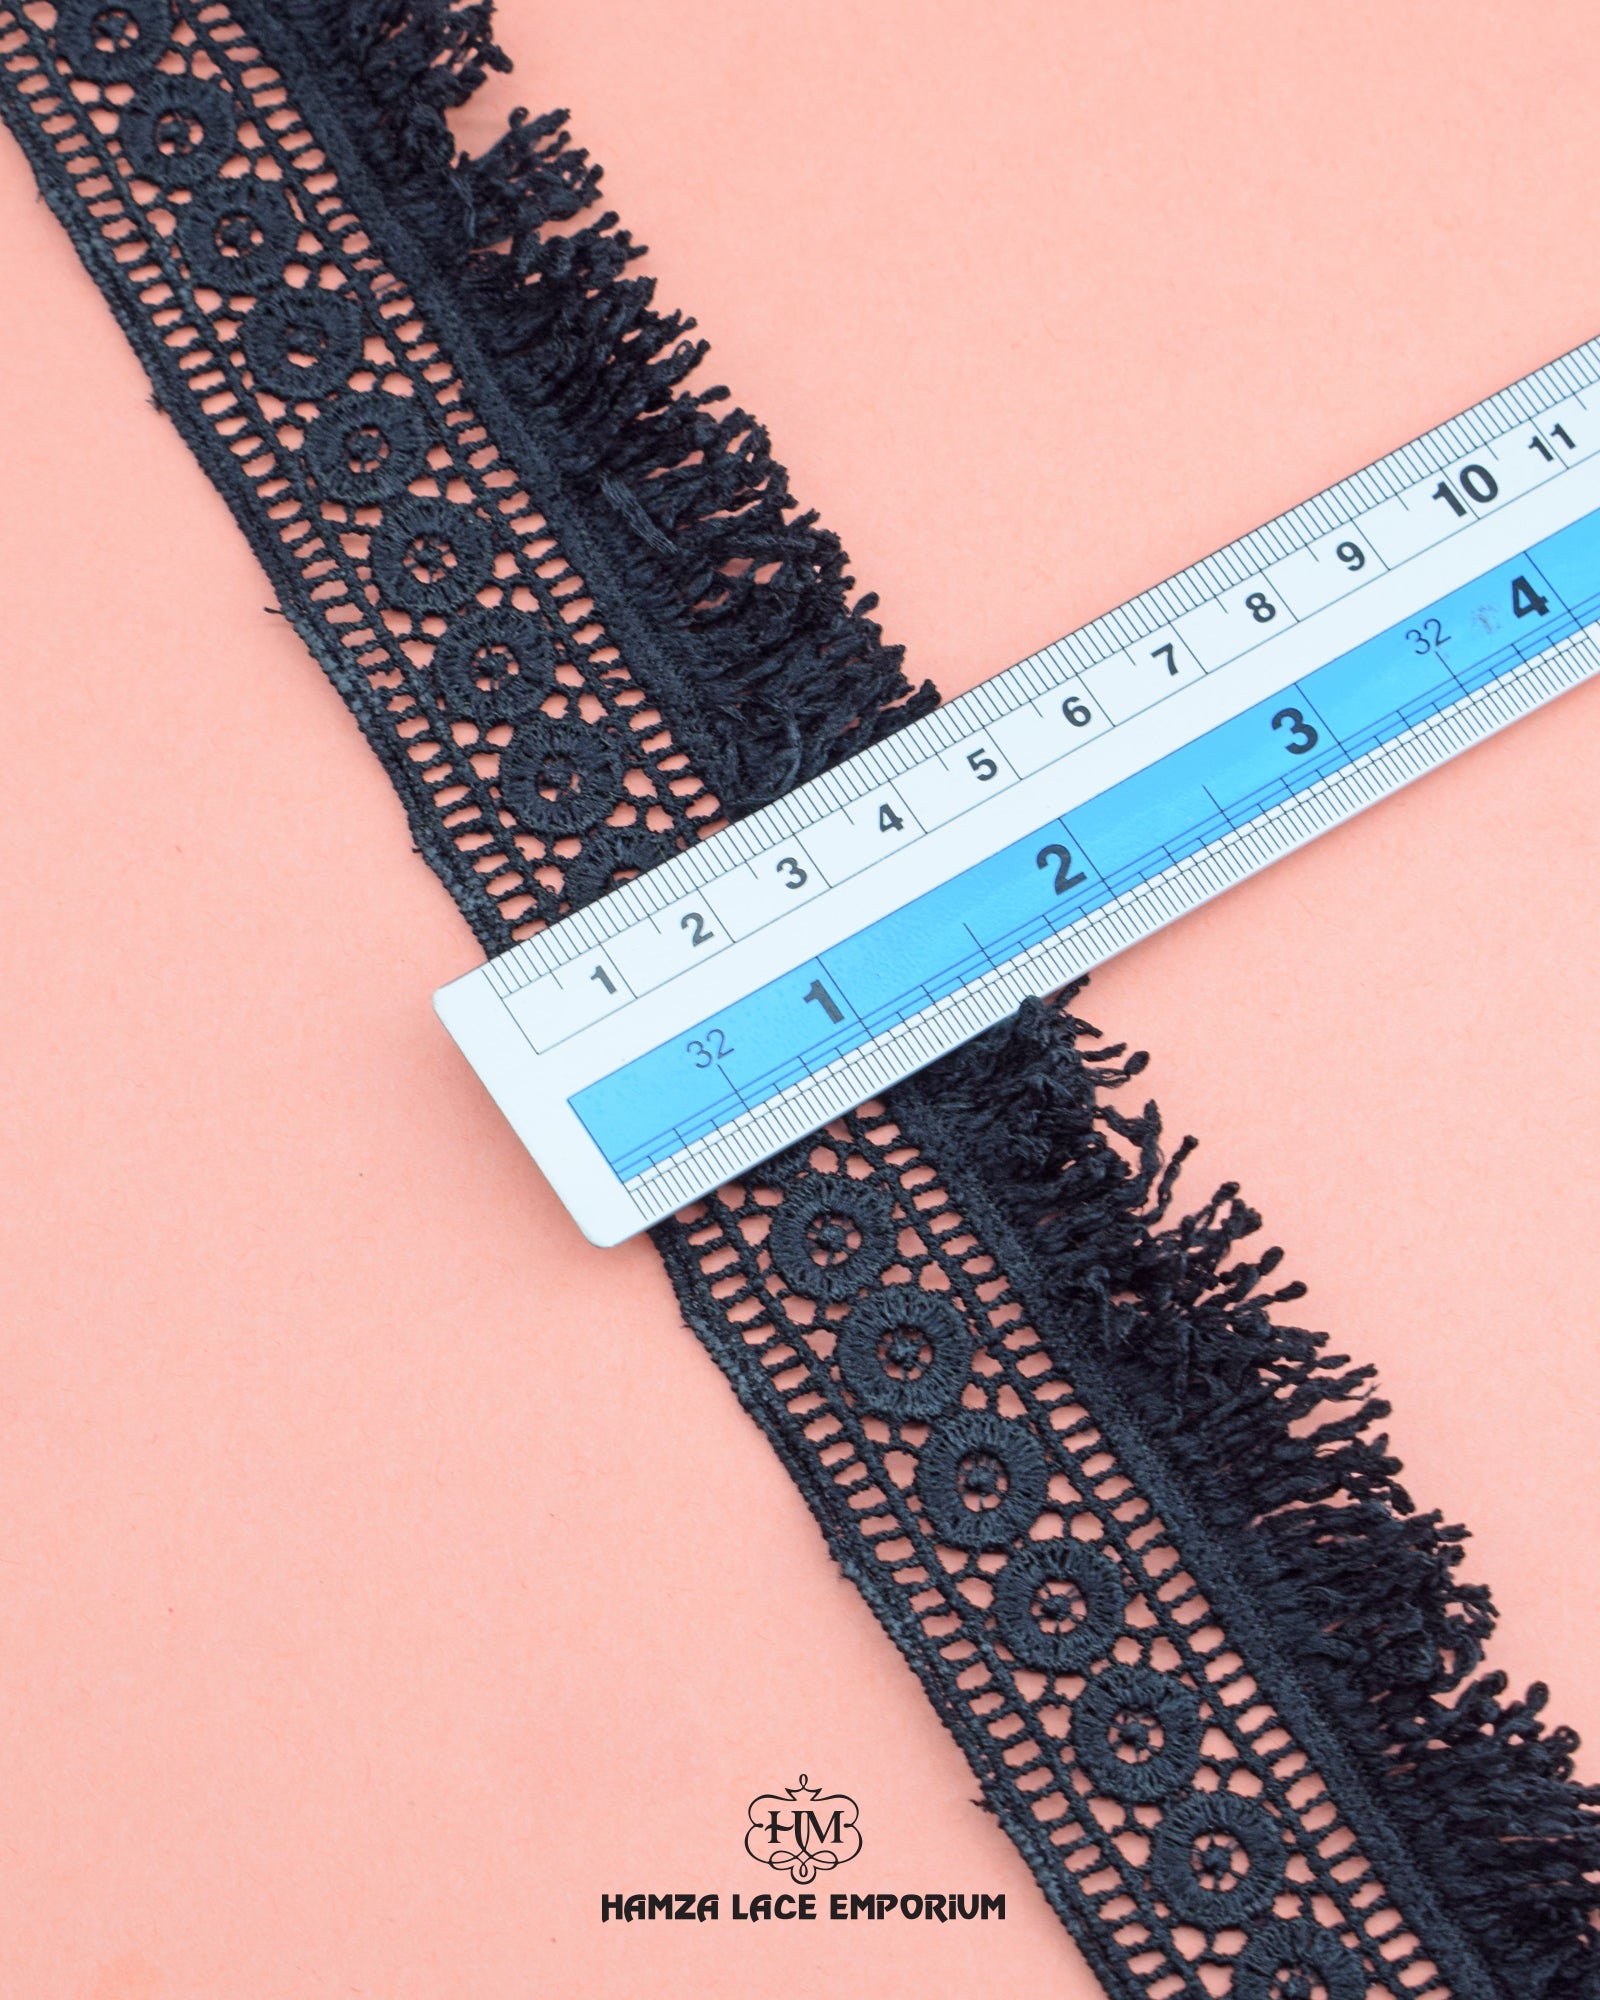 The size of the 'Edging Jhalar Lace 1209' is given with the help of a ruler.